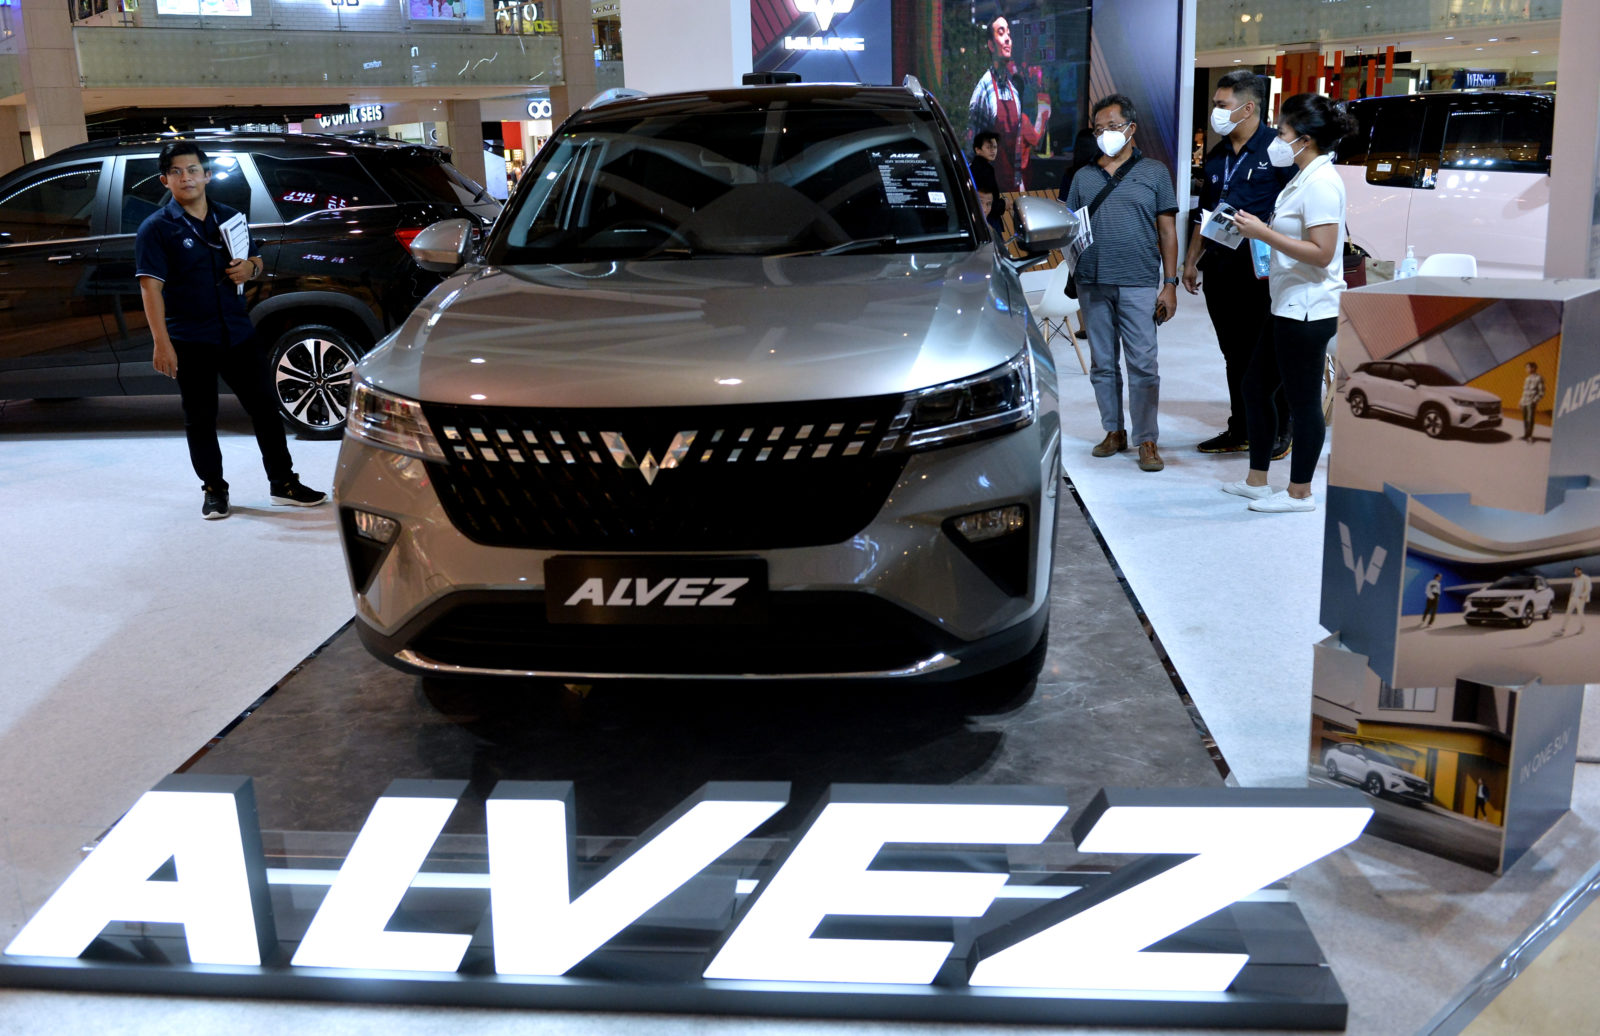 Image Alvez, Wuling’s Newest Compact SUV Greets The People on The Island of Gods